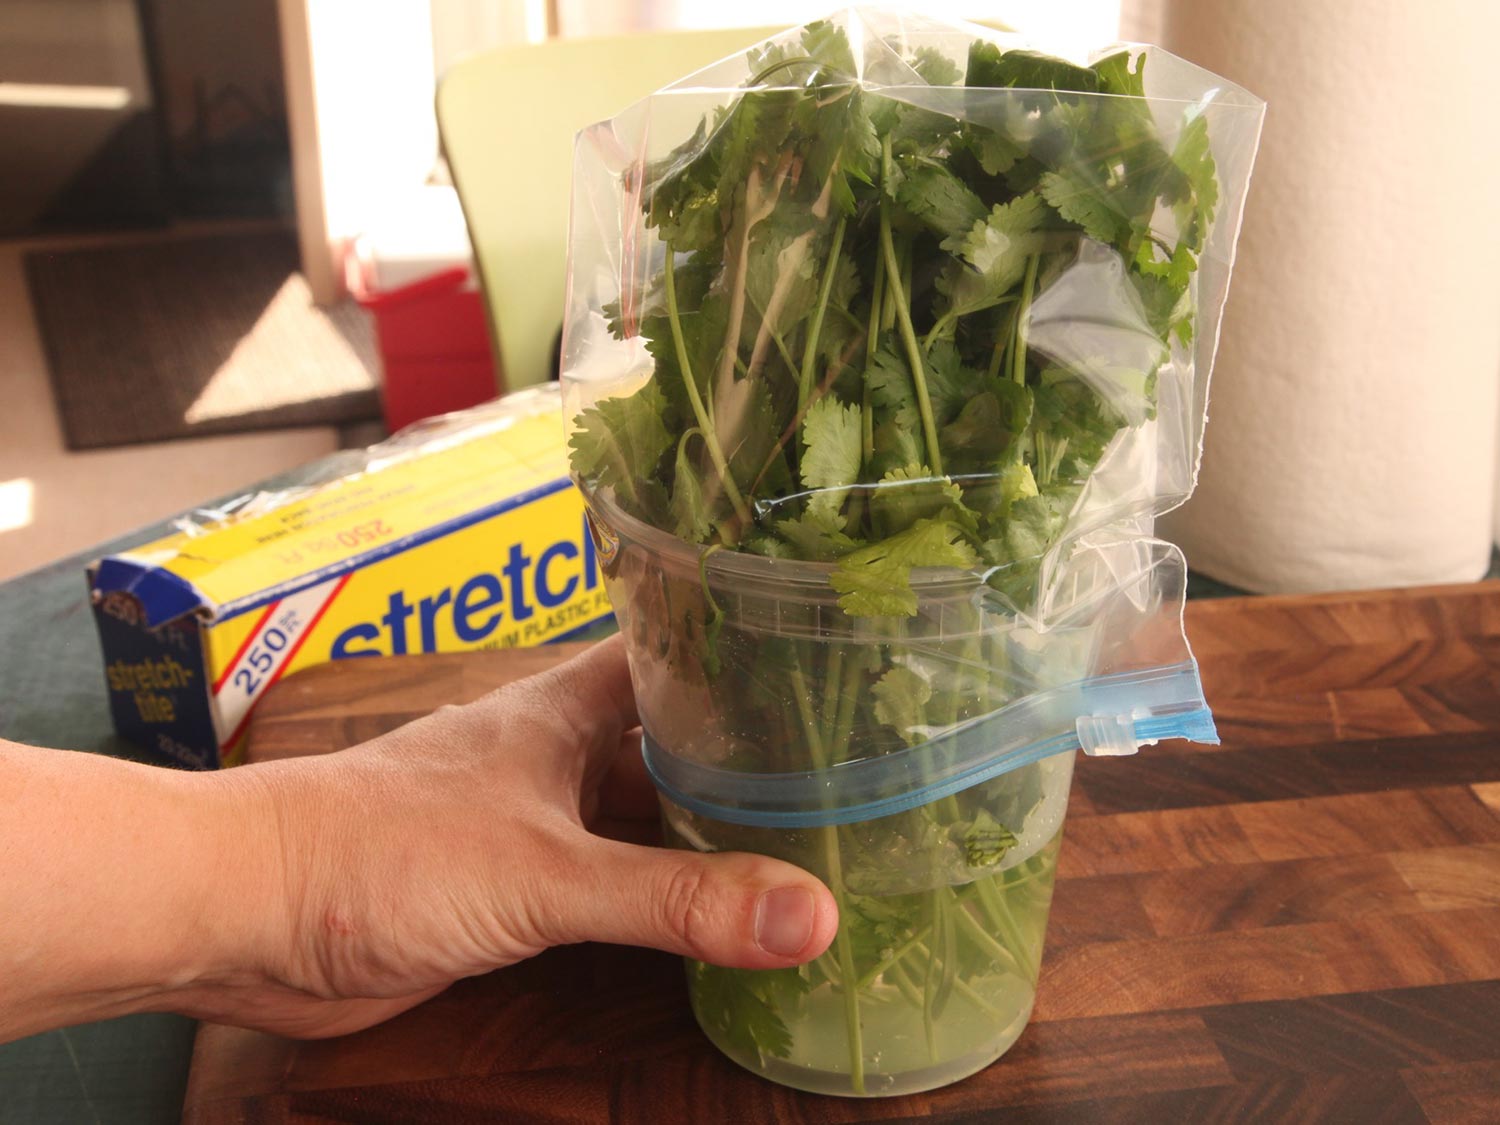 Storing fresh herbs in water and covered with a baggie.